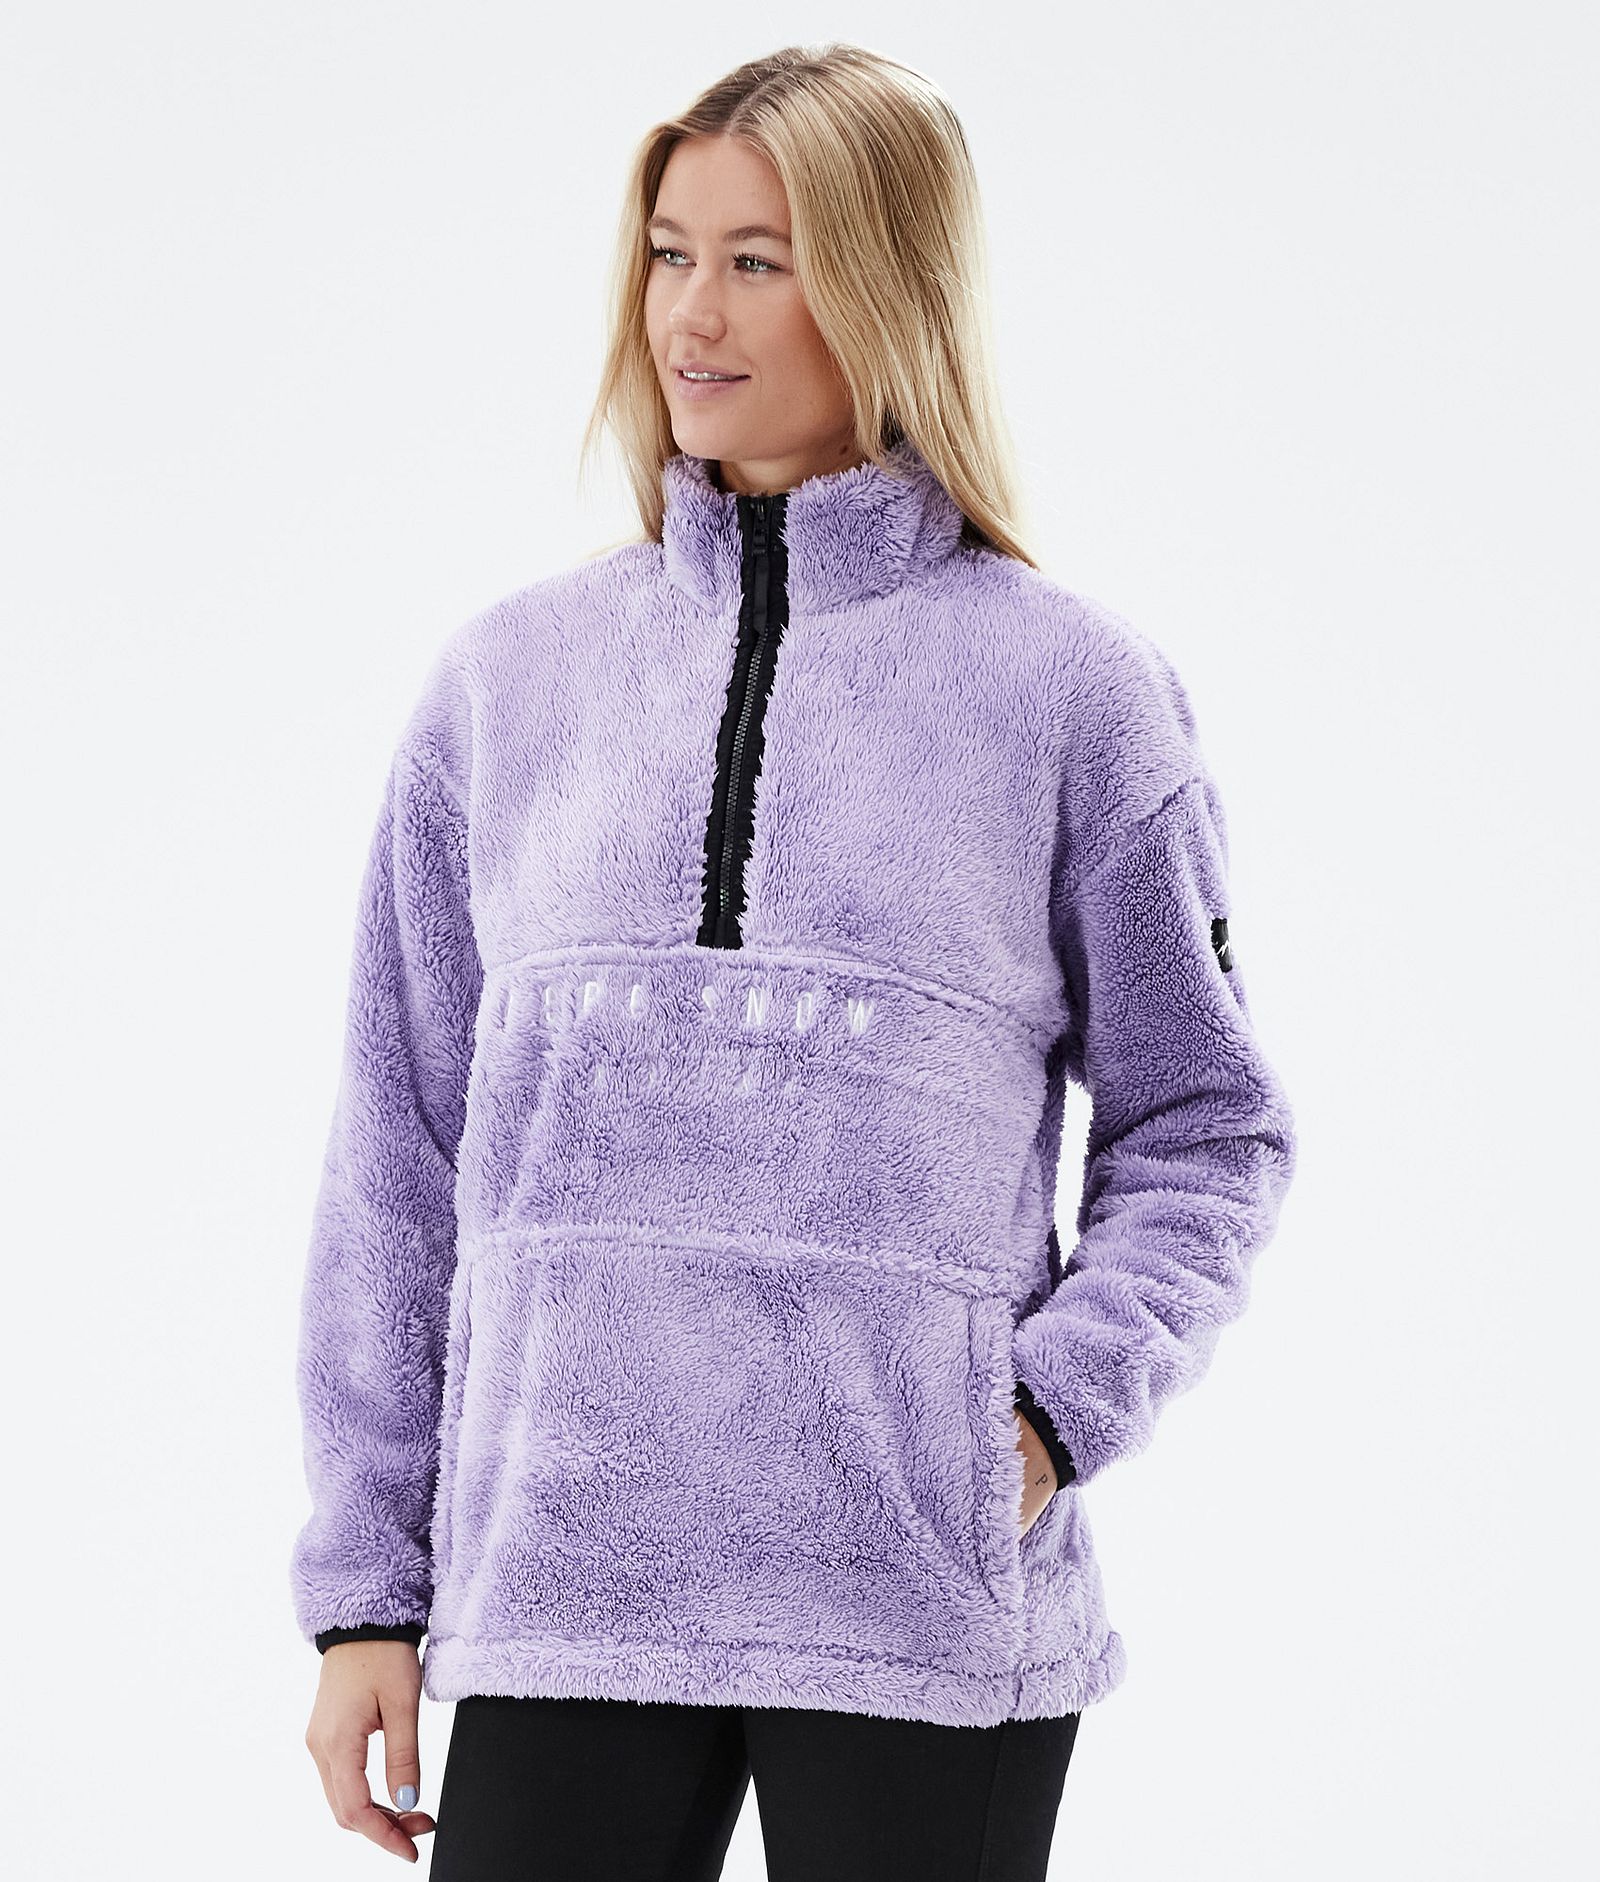 Pile W 2022 Forro Polar Mujer Faded Violet